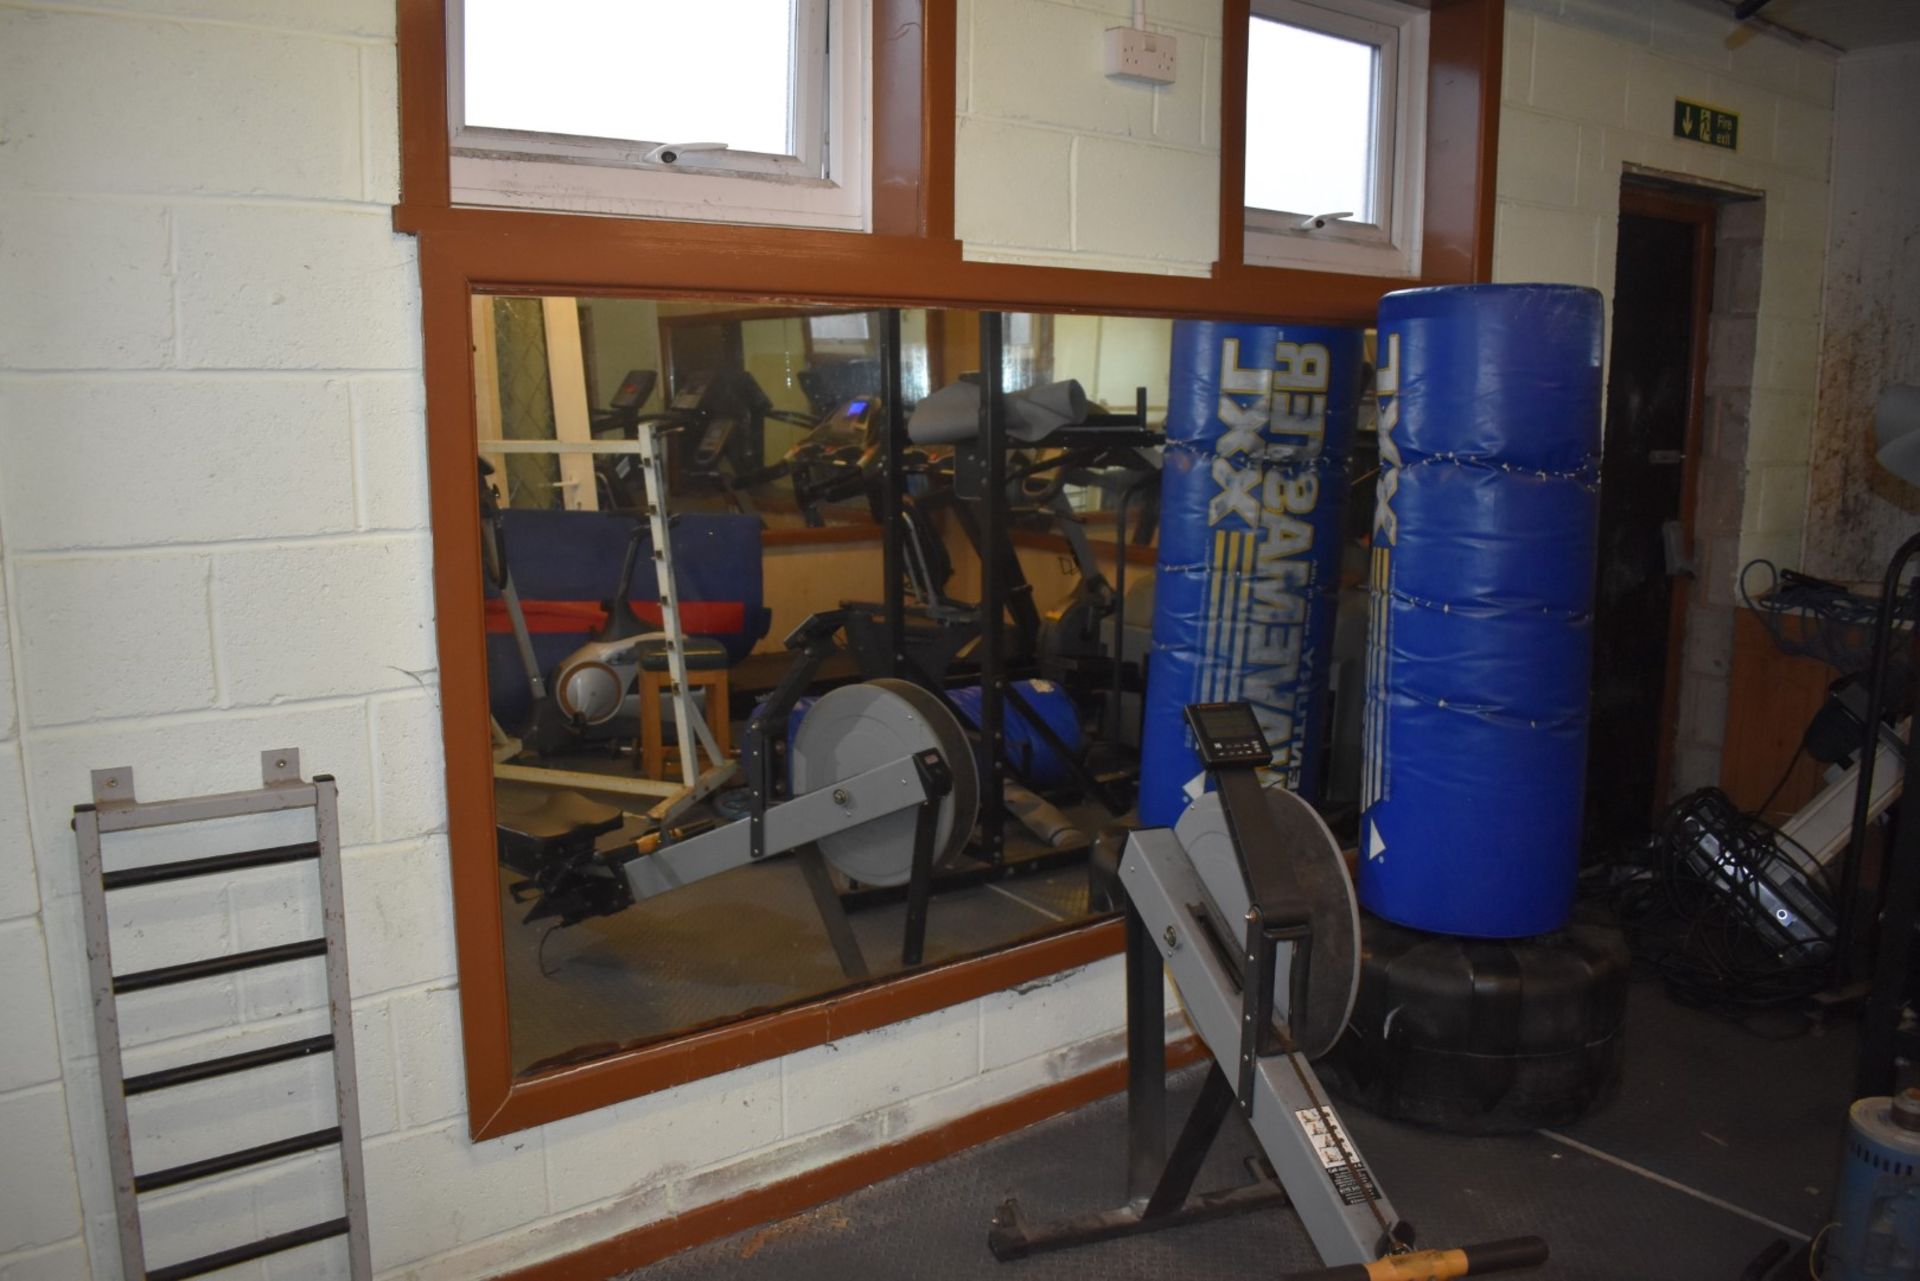 Contents of Bodybuilding and Strongman Gym - Includes Approx 30 Pieces of Gym Equipment, Floor Mats, - Image 59 of 95